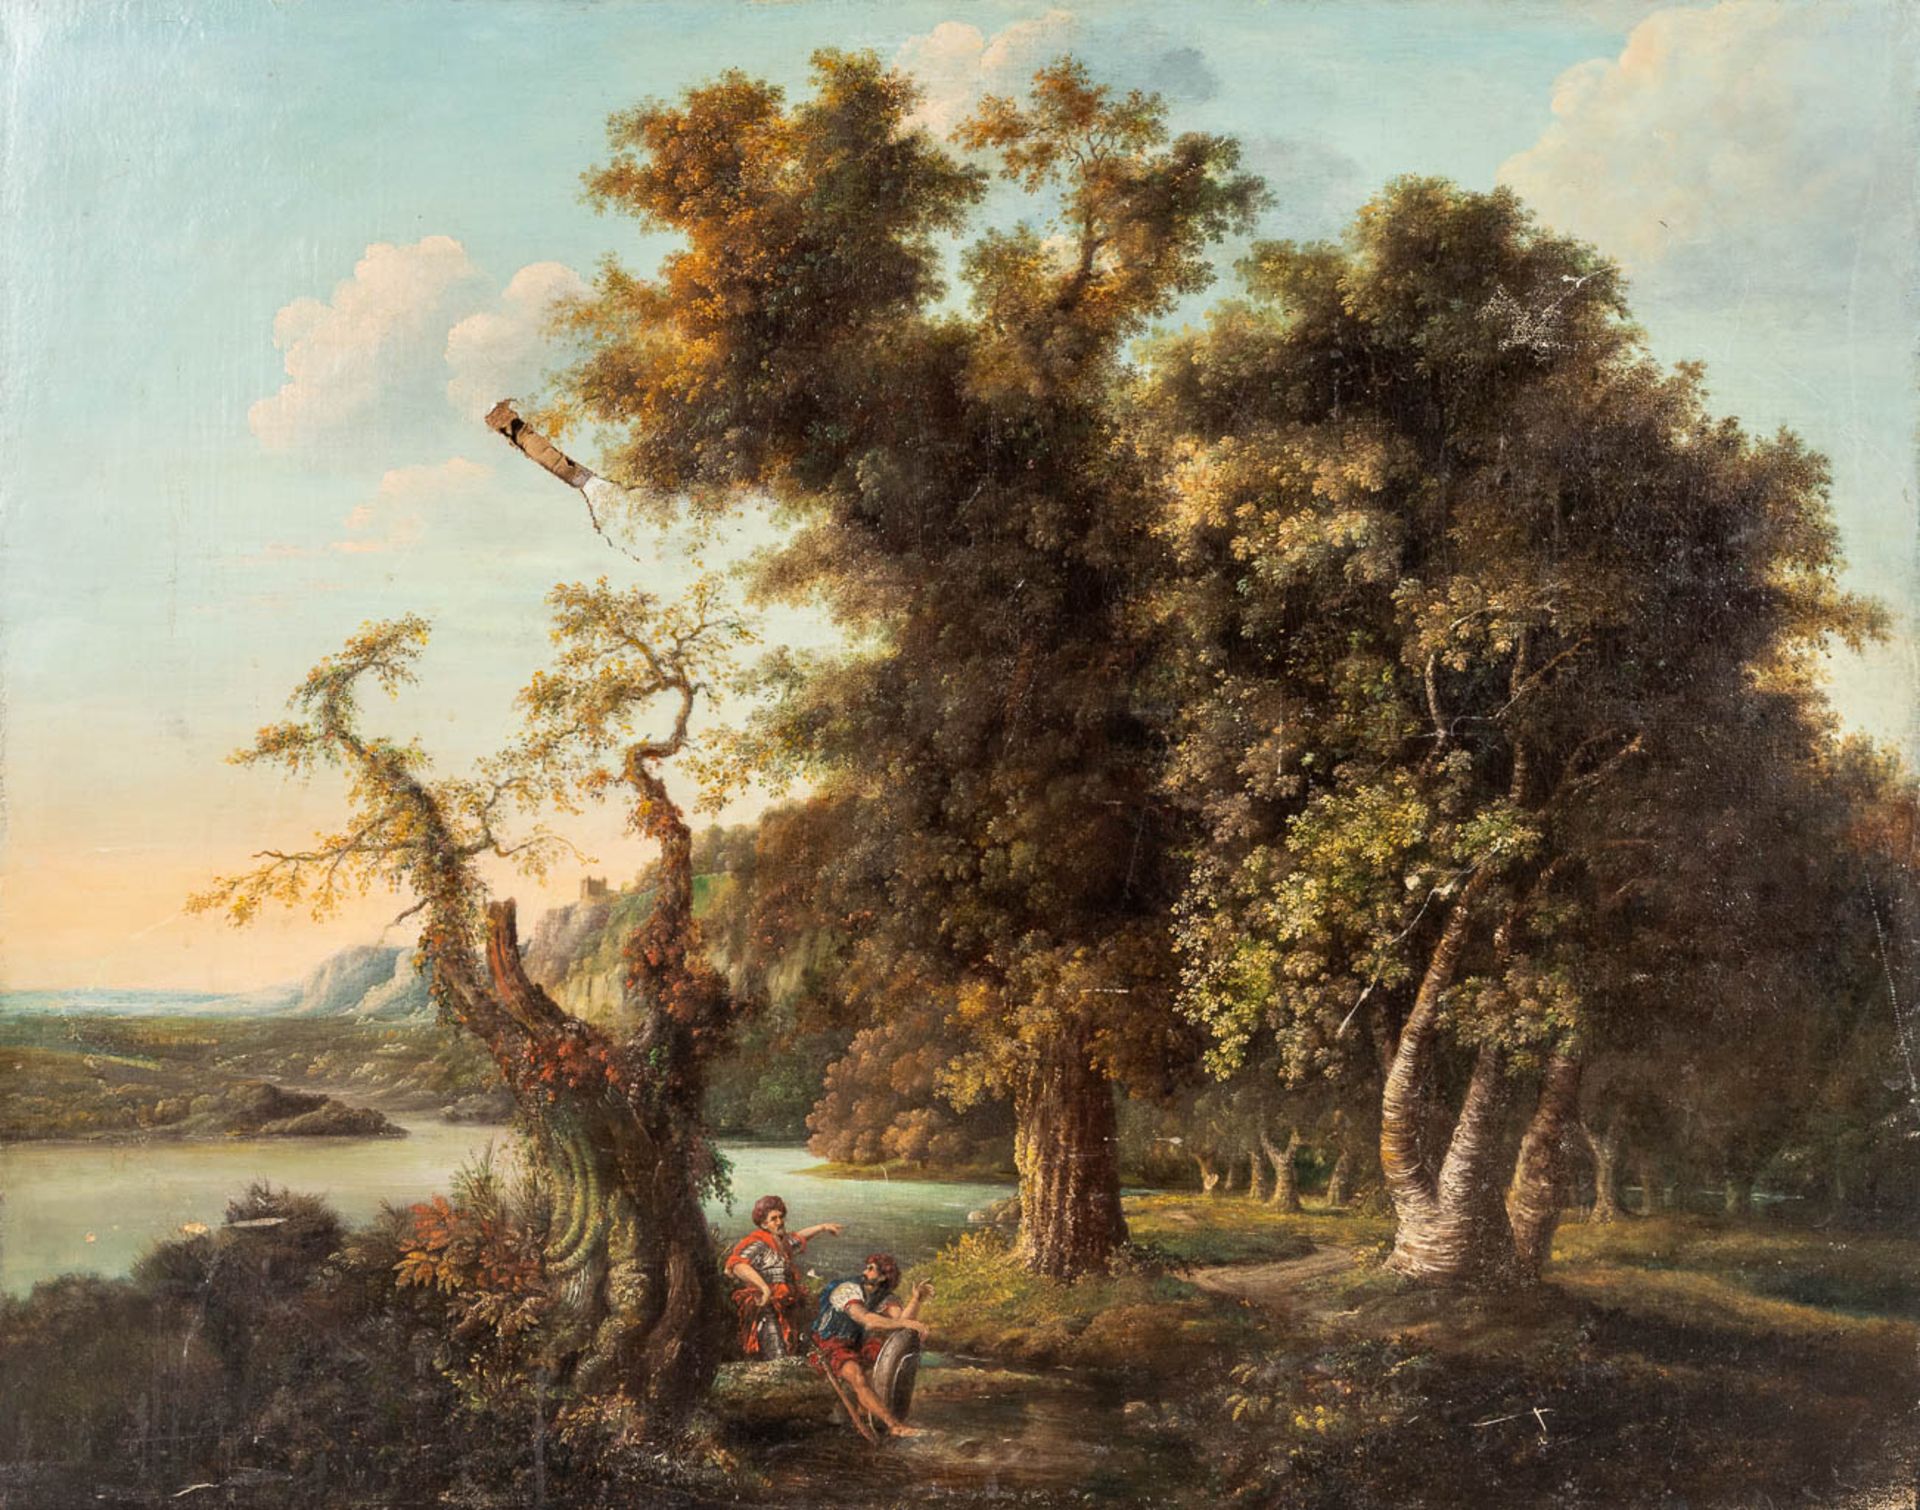 An antique painting, 'Landscape with figurines' oil on canvas. 17th century. (W: 124 x H: 98 cm)